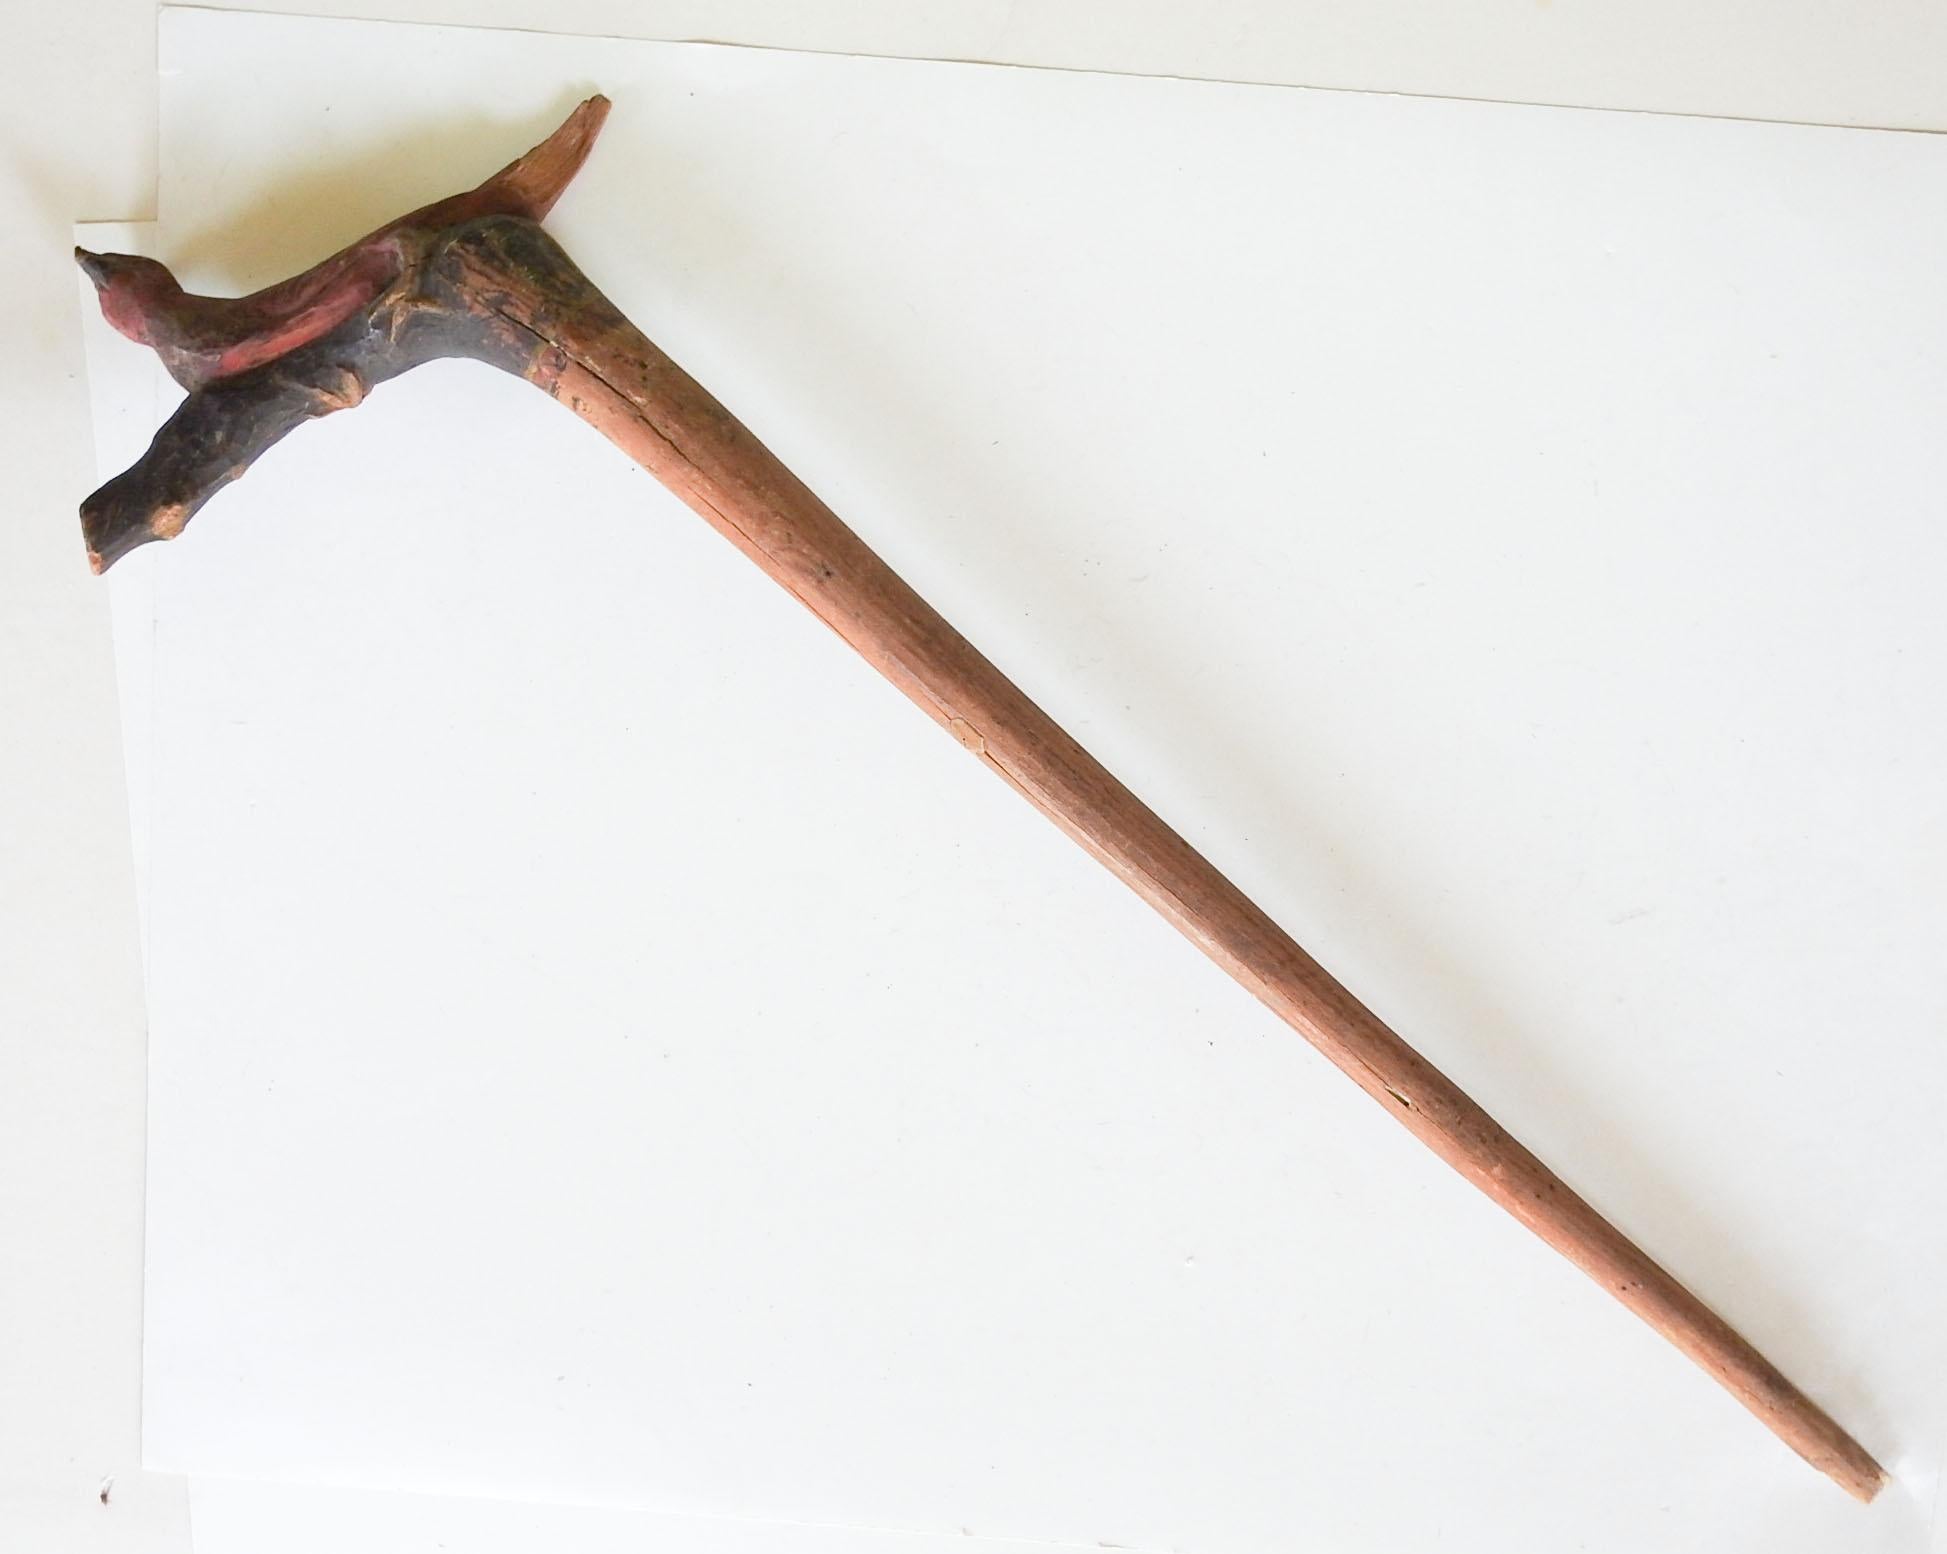 Vintage circa 1940s hand carved Folk Art cane by Fritz Rummler (1888-1983) Fredericksburg Texas. Branch of a tree carved into a bird with his feet gripping around the handle. The bird is painted red with a the rest of the handle painted black and a